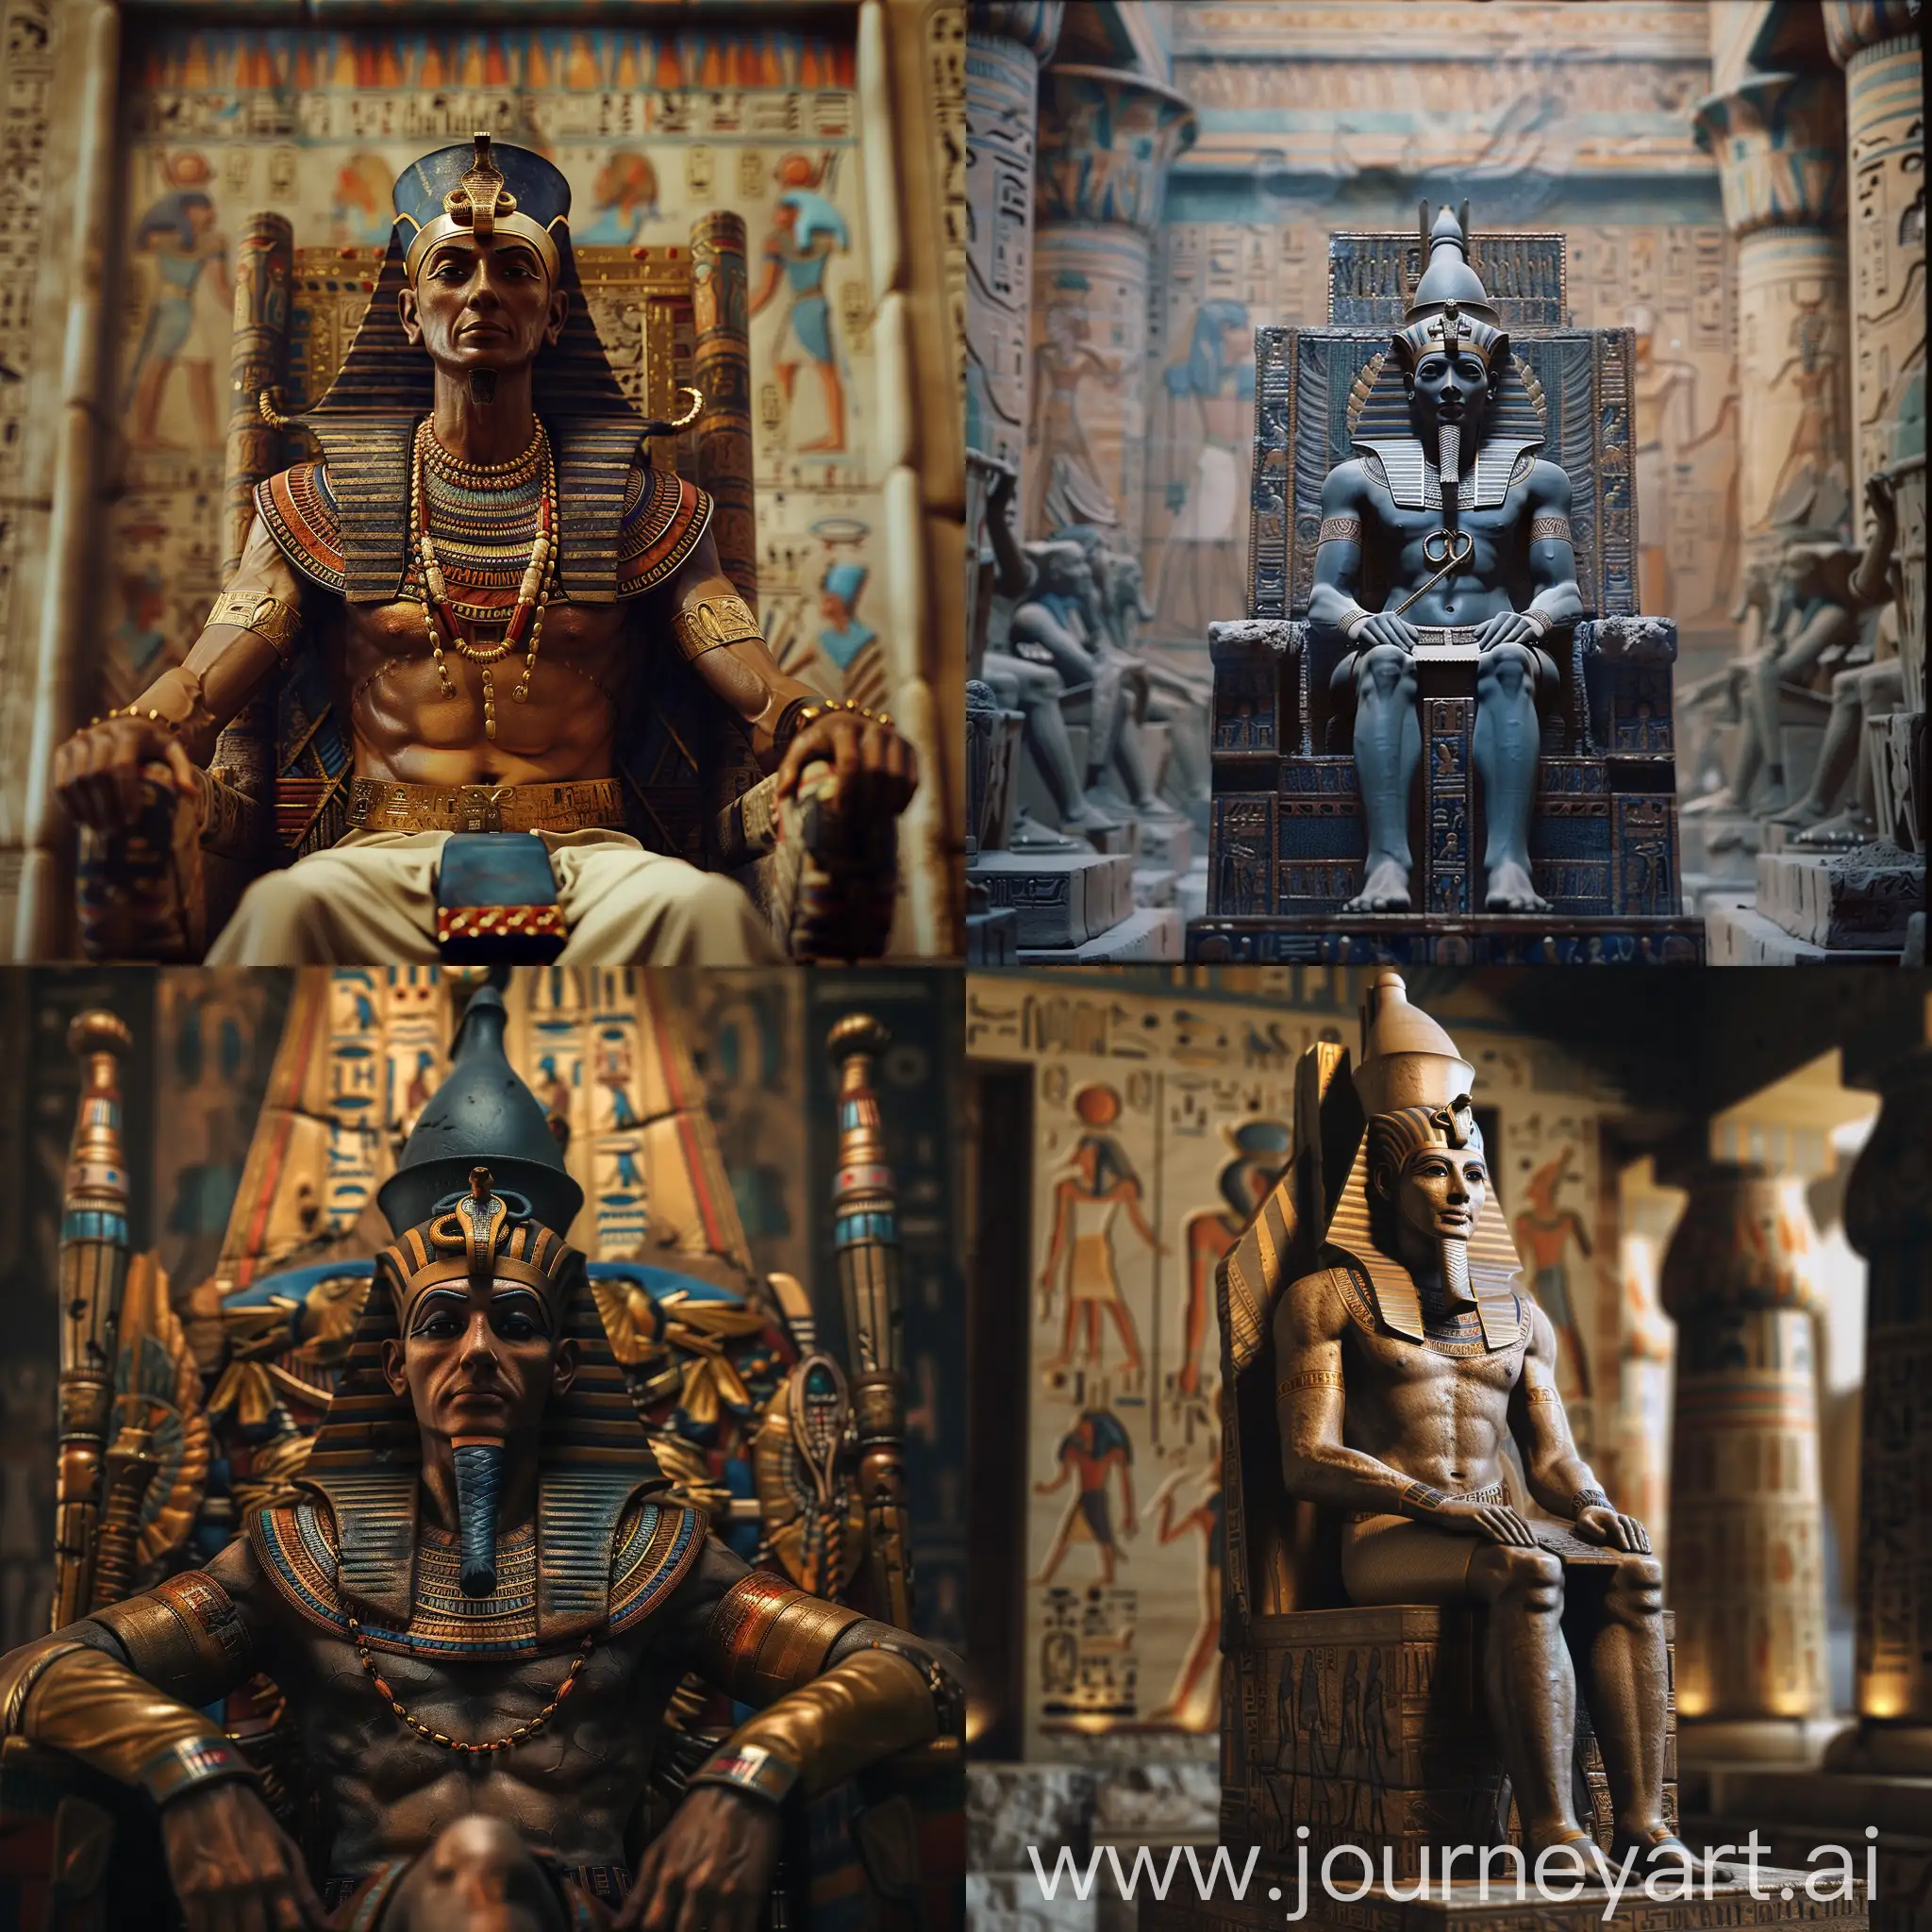  A realistic photograph of Pharaoh Ramesses II seated on his throne, captured with an 8mm camera, high detail, cinematic lighting